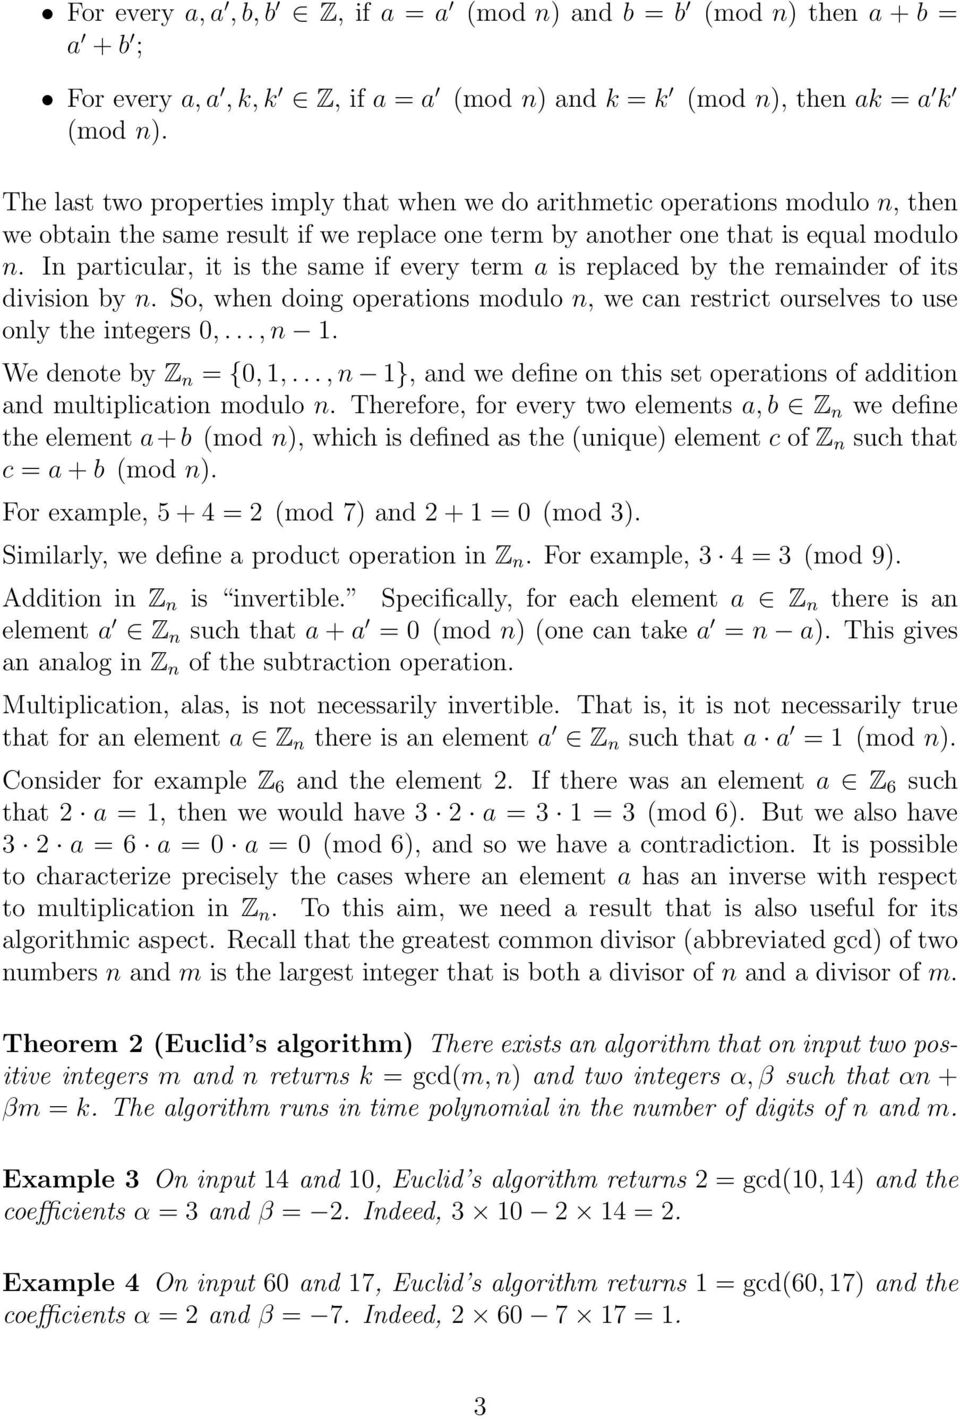 In particular, it is the same if every term a is replaced by the remainder of its division by n. So, when doing operations modulo n, we can restrict ourselves to use only the integers 0,..., n 1.